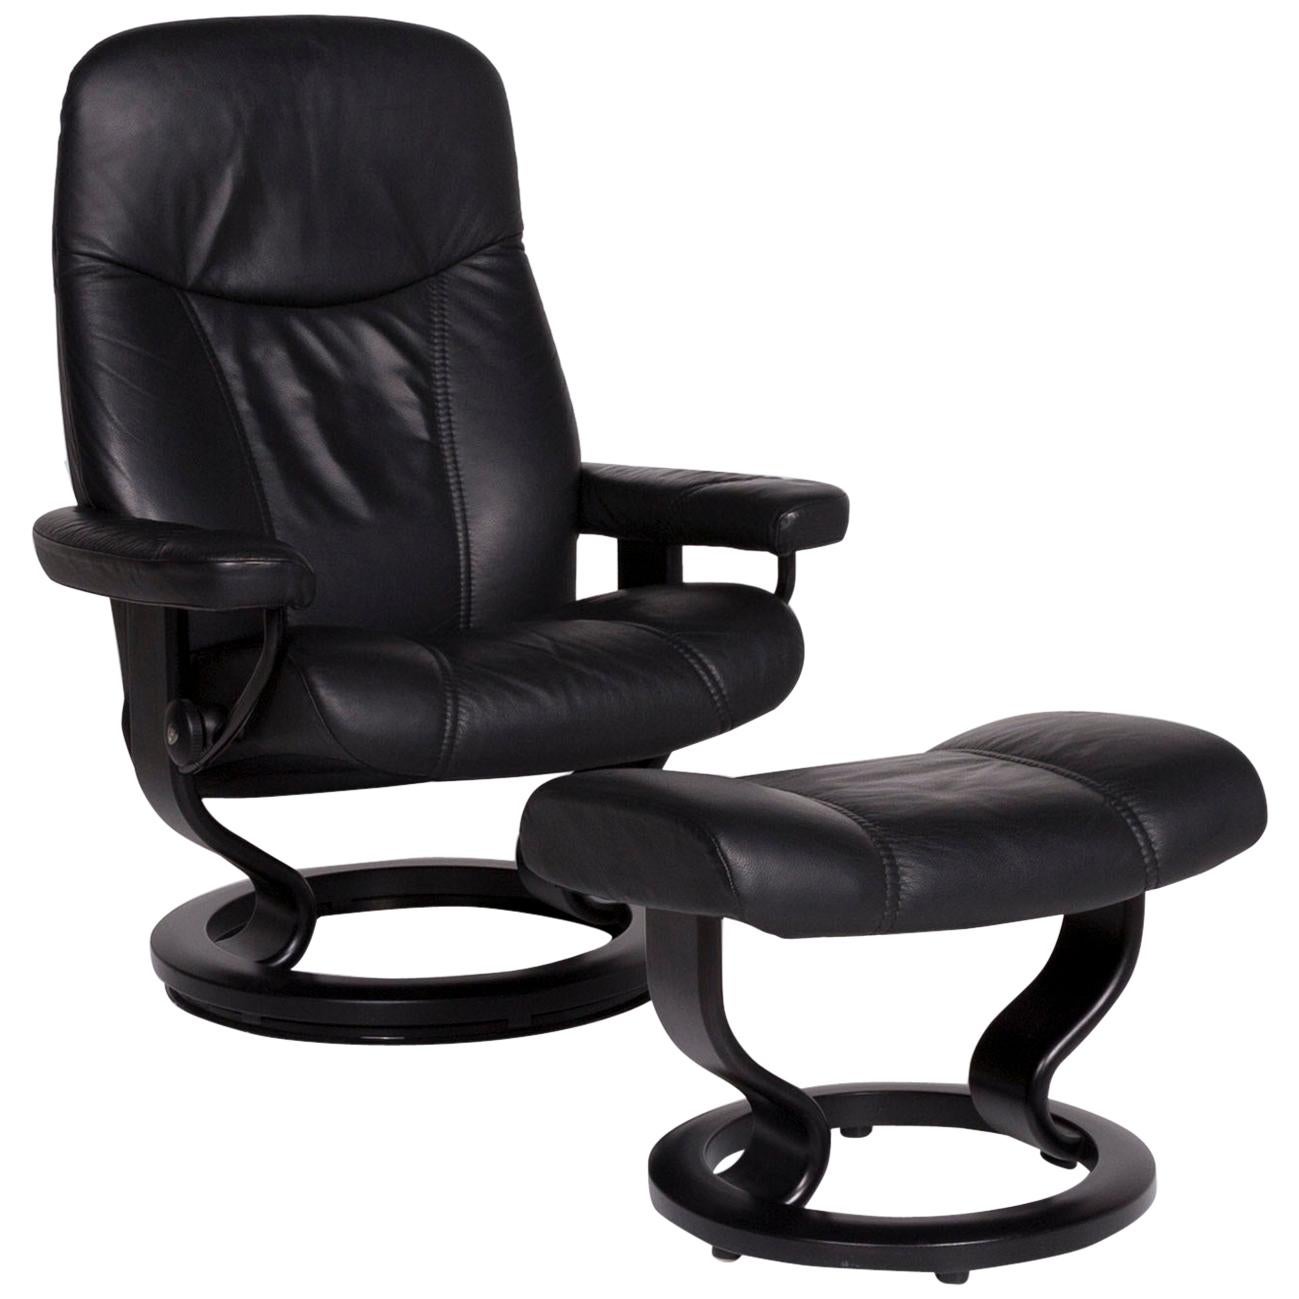 Stressless Consul Leather Armchair Black Includes Stool